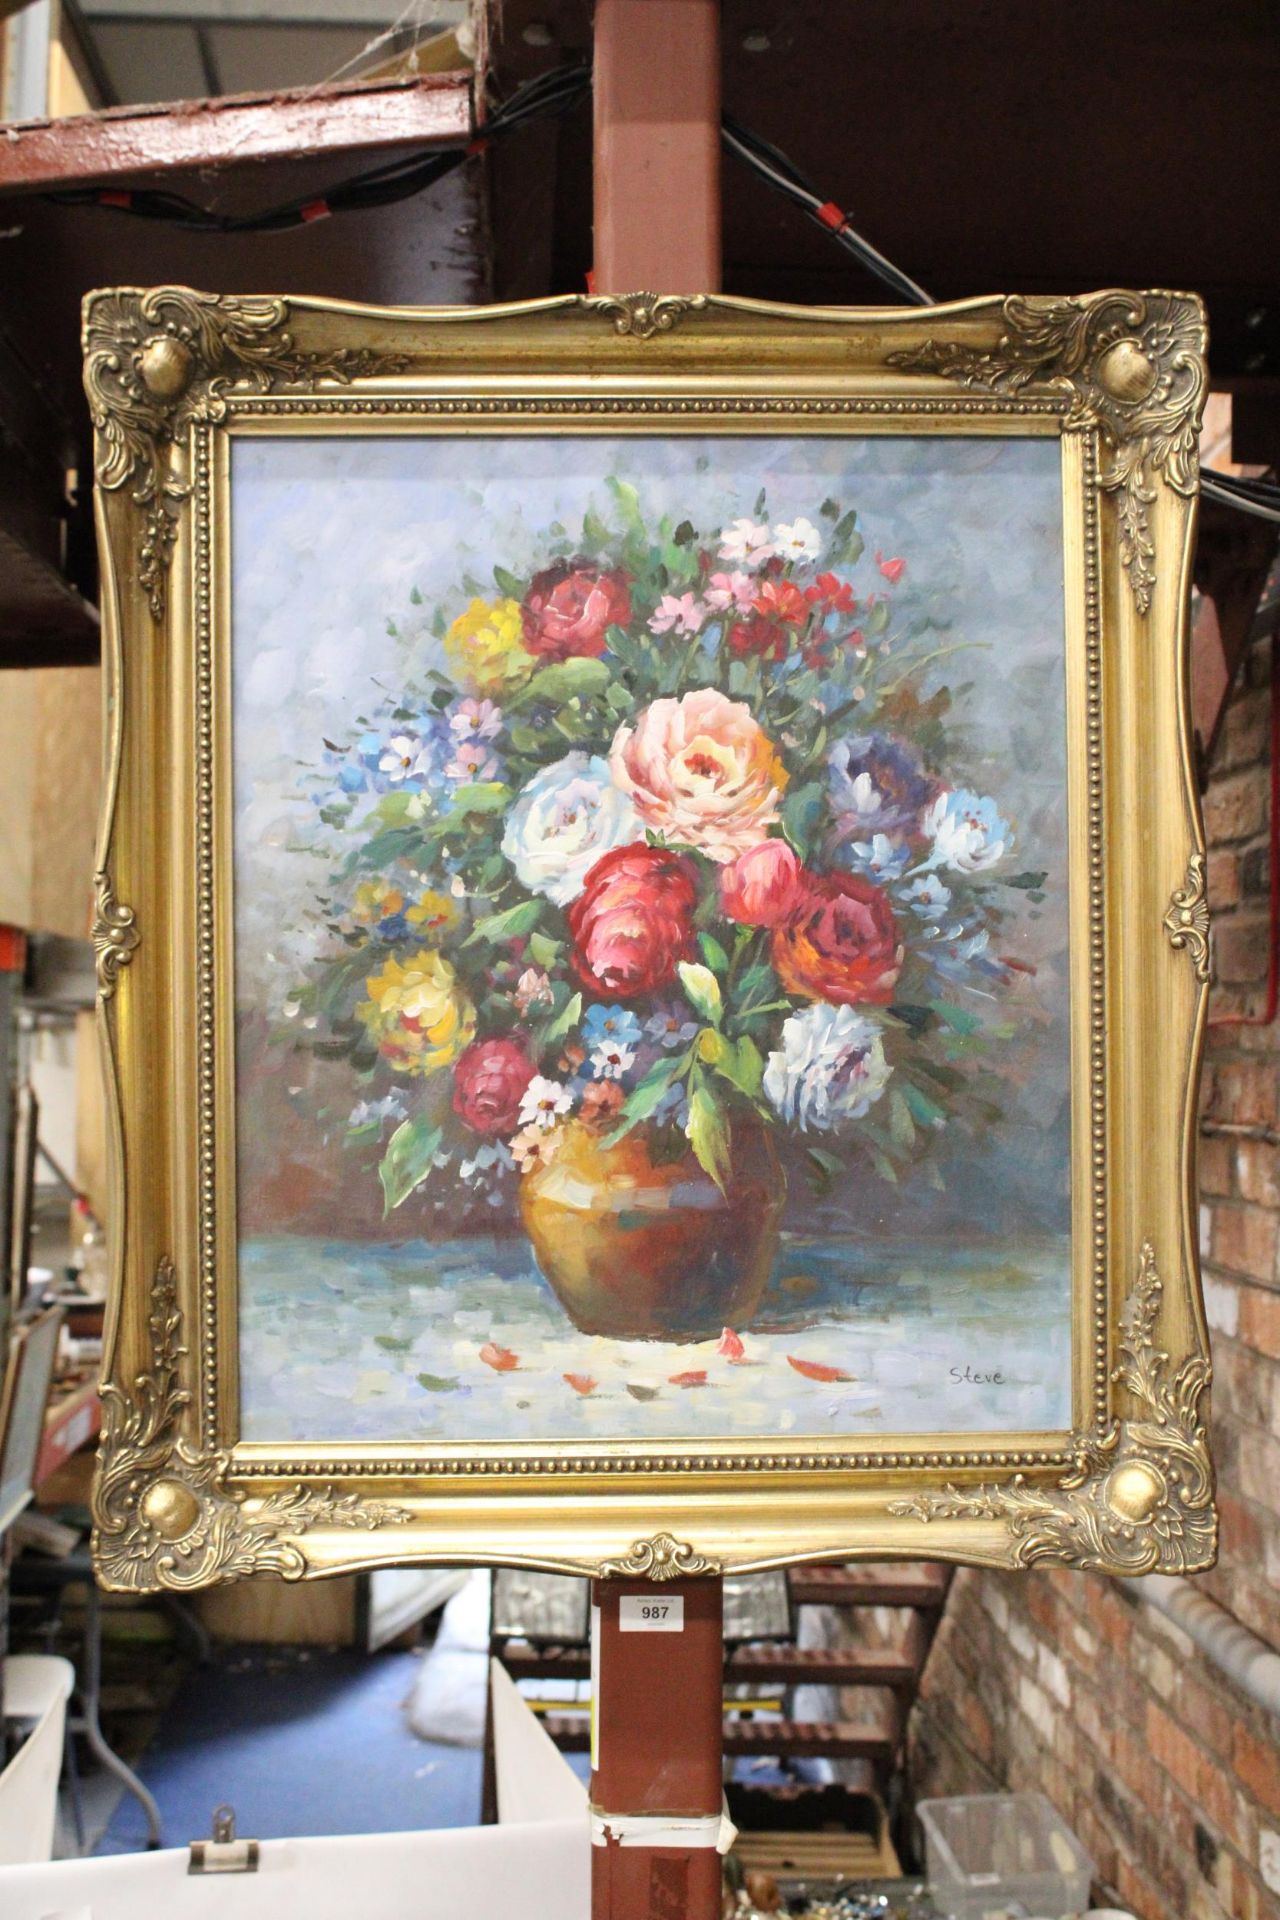 A LARGE STILL LIFE OIL ON BOARD OF FLOWERS IN A VASE IN AN ORNATE GILT FRAME